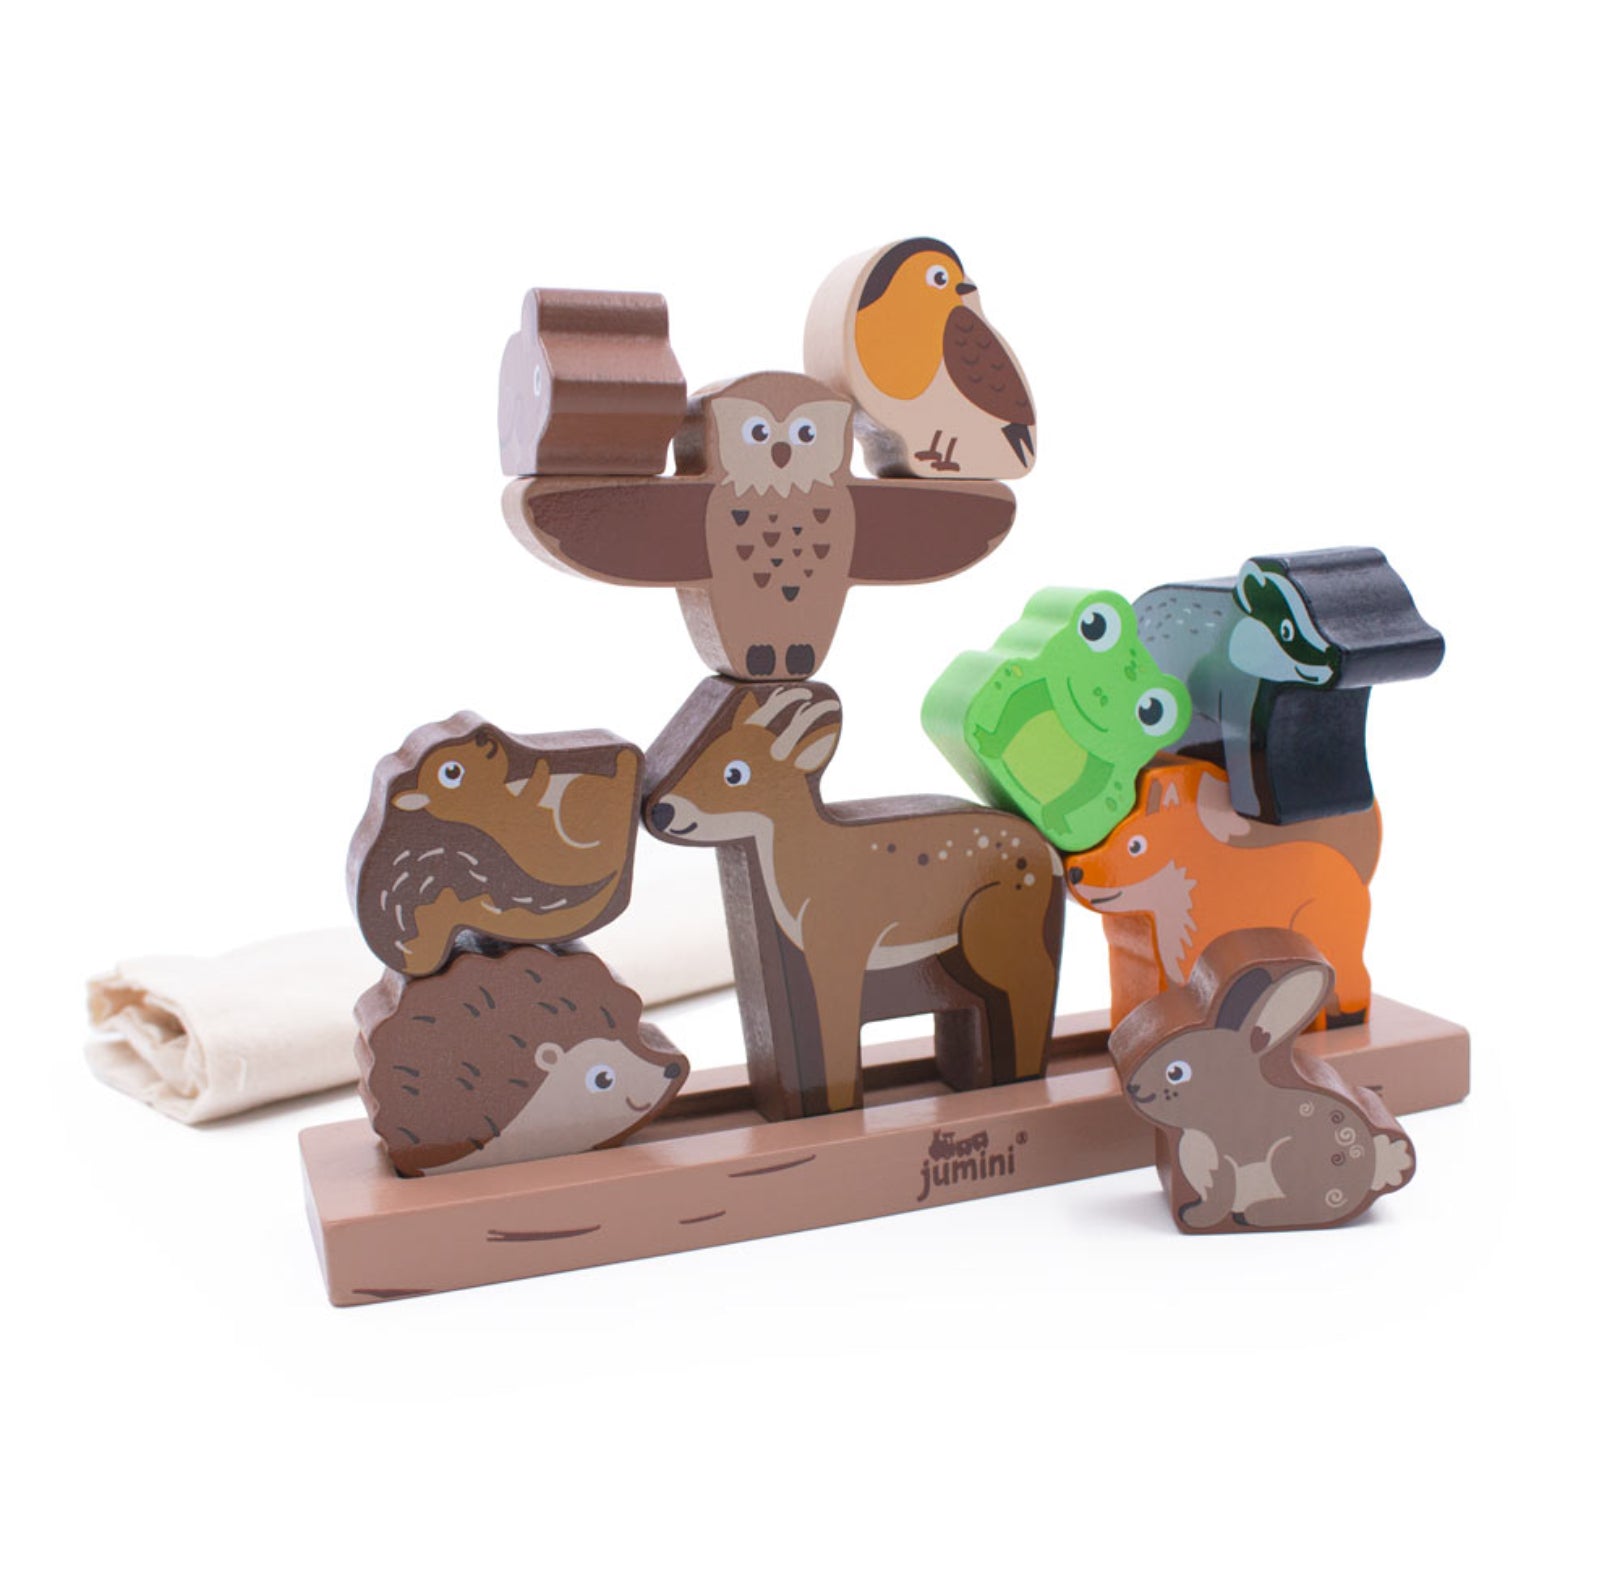 Jumini Woodland Collection Stacking Game Wooden Toy